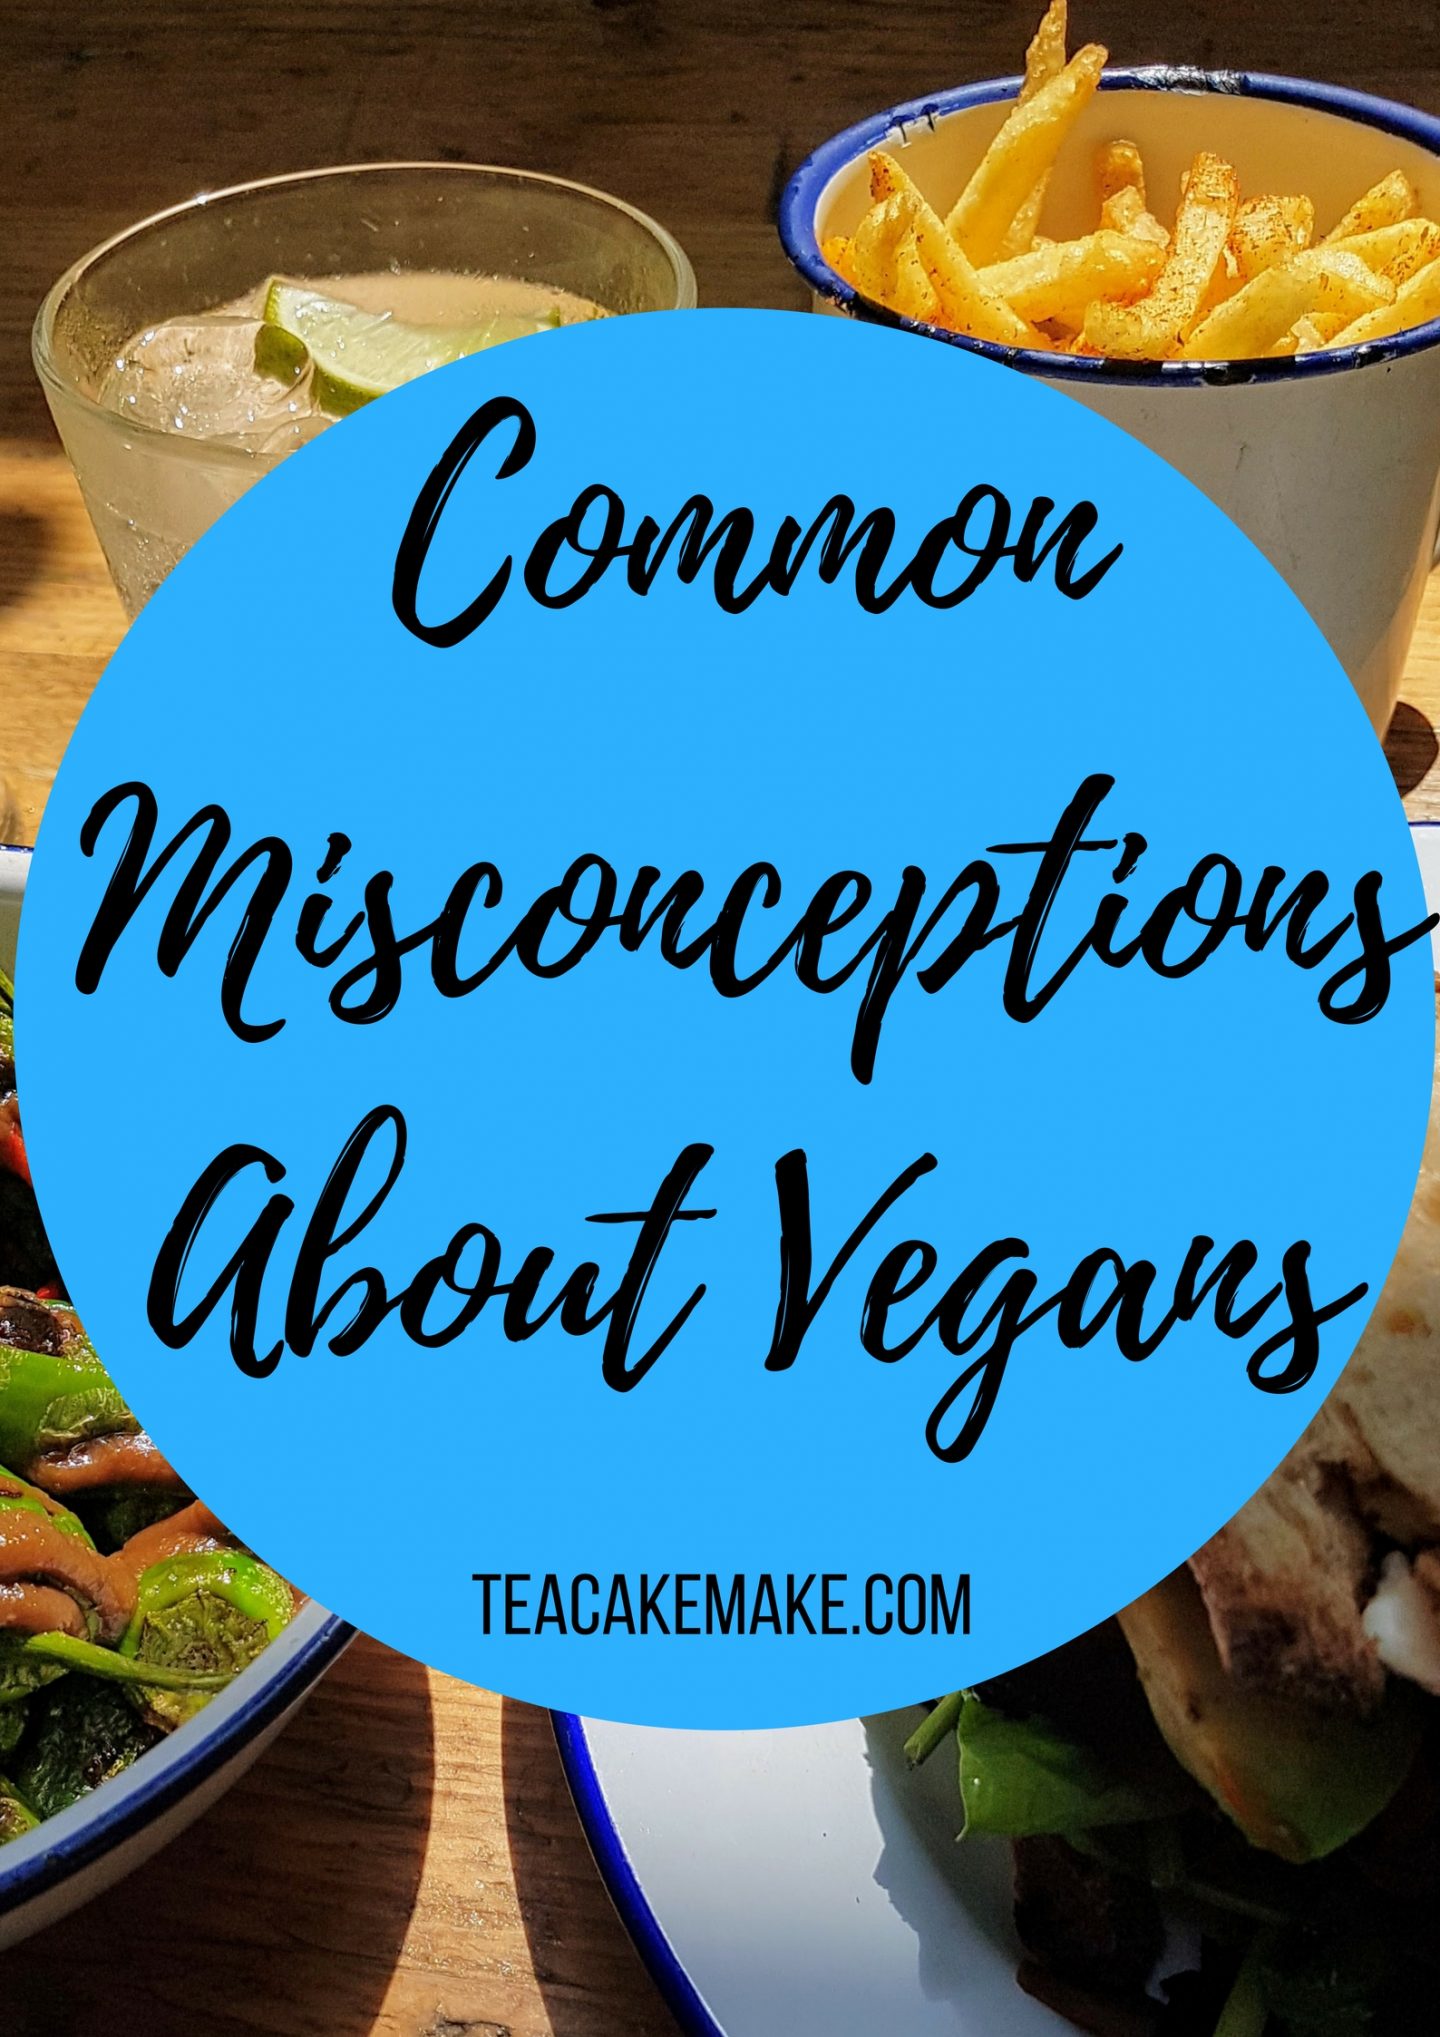 Misconceptions about veganism